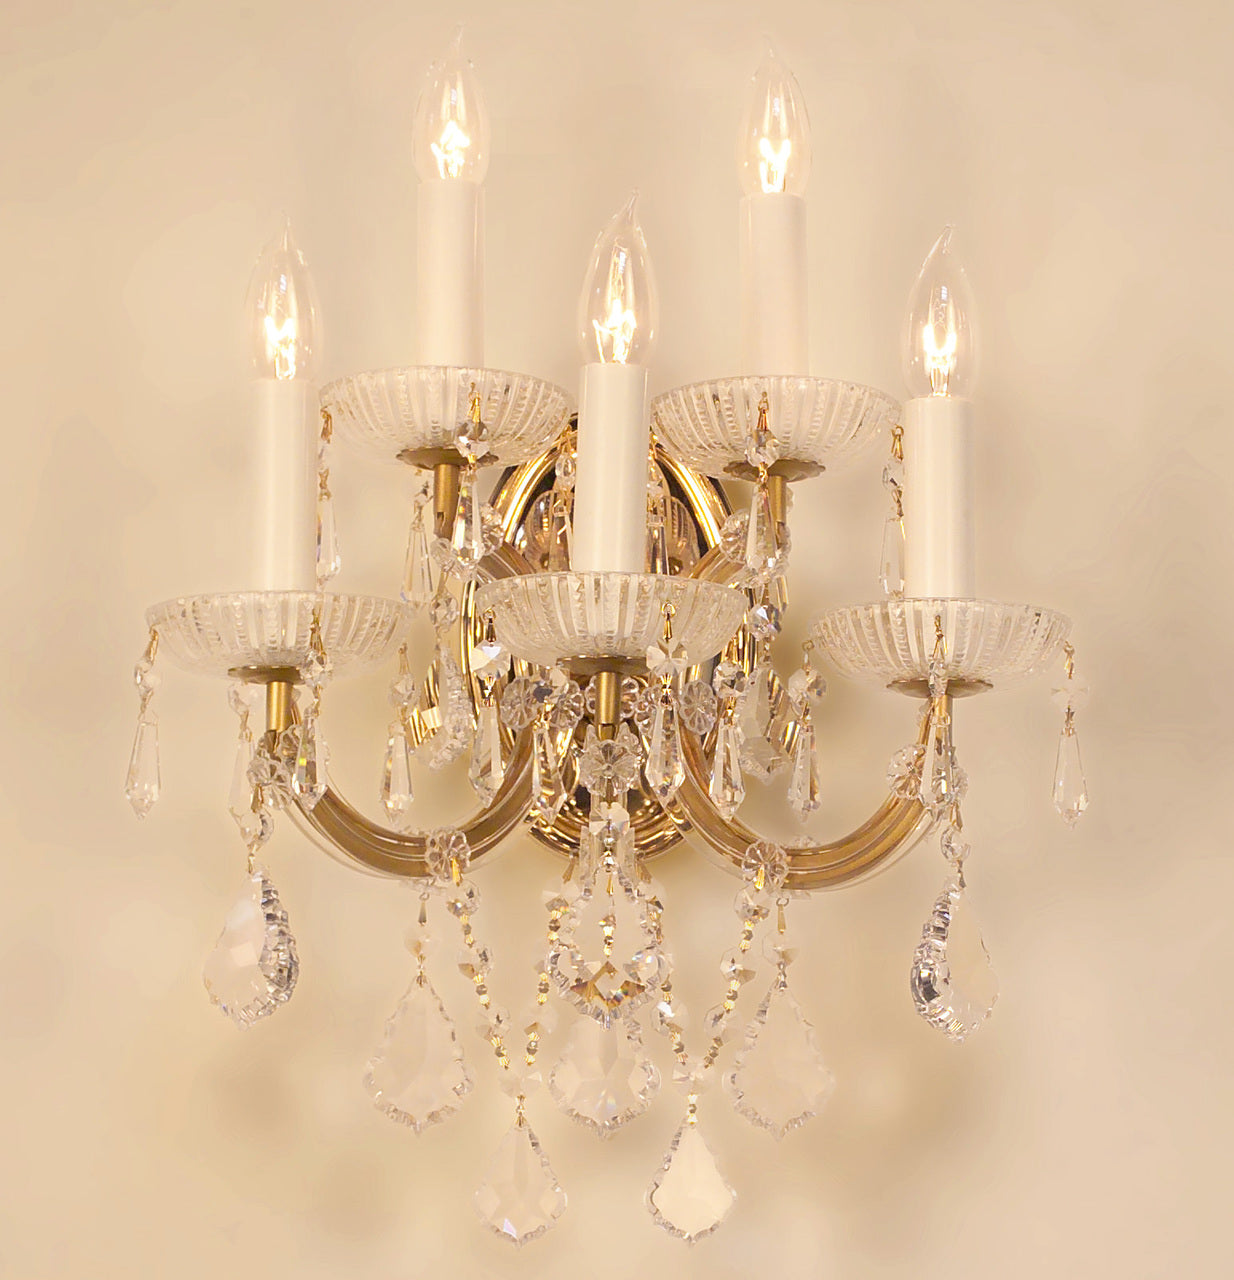 Classic Lighting 8105 OWG SC Maria Theresa Traditional Crystal Wall Sconce in Olde World Gold (Imported from Italy)